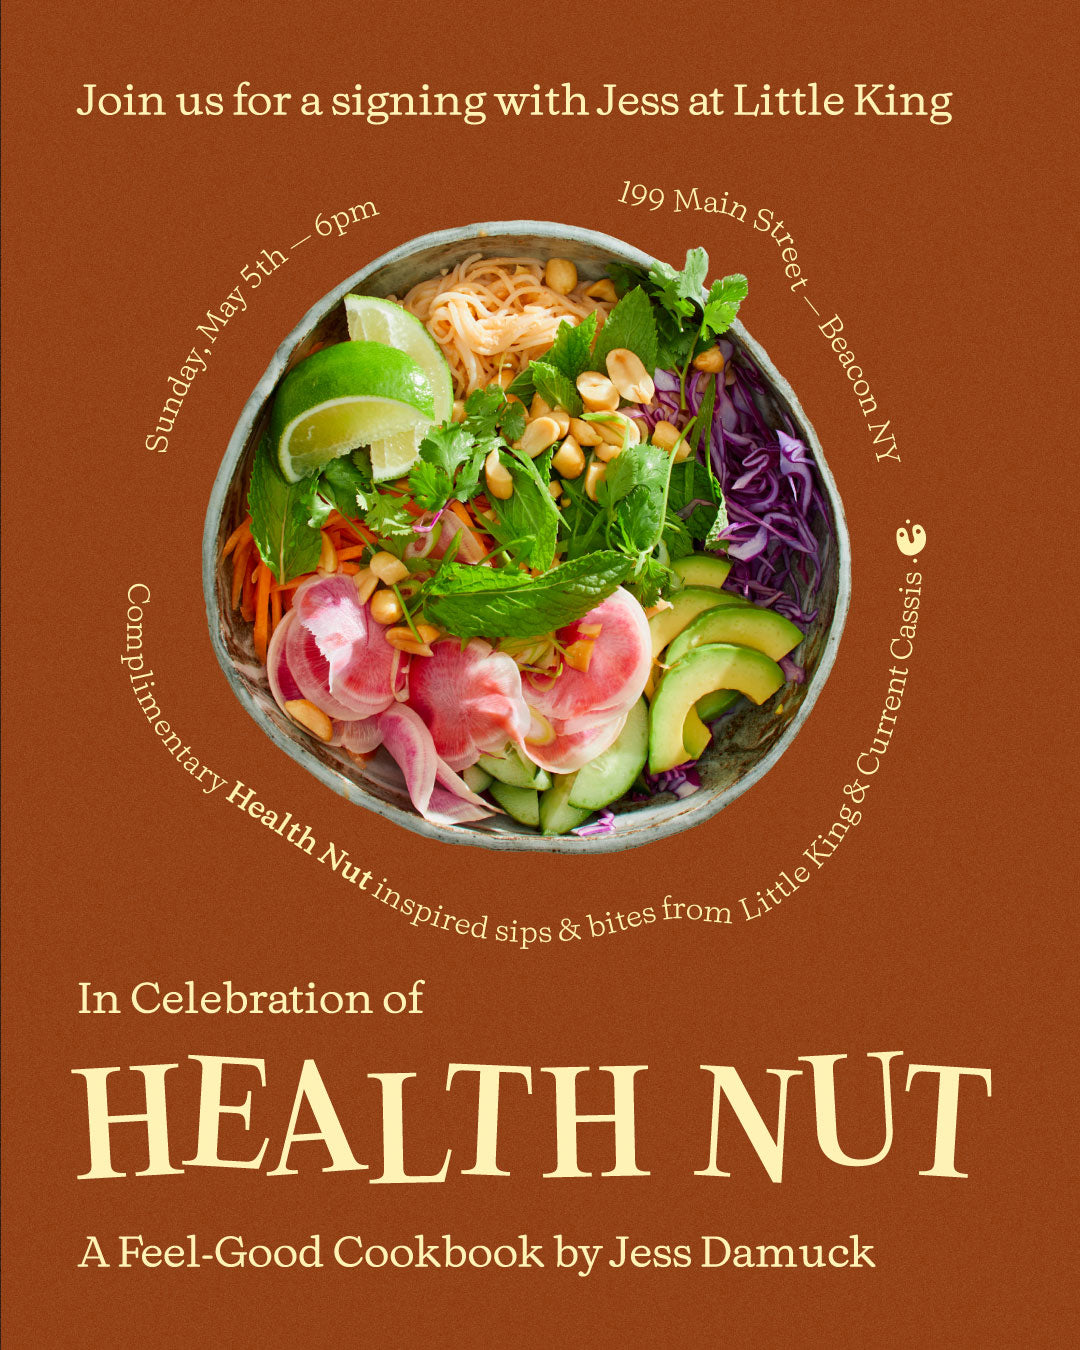 Health Nut Event + Book with Jess Damuck at Little King on May 5th